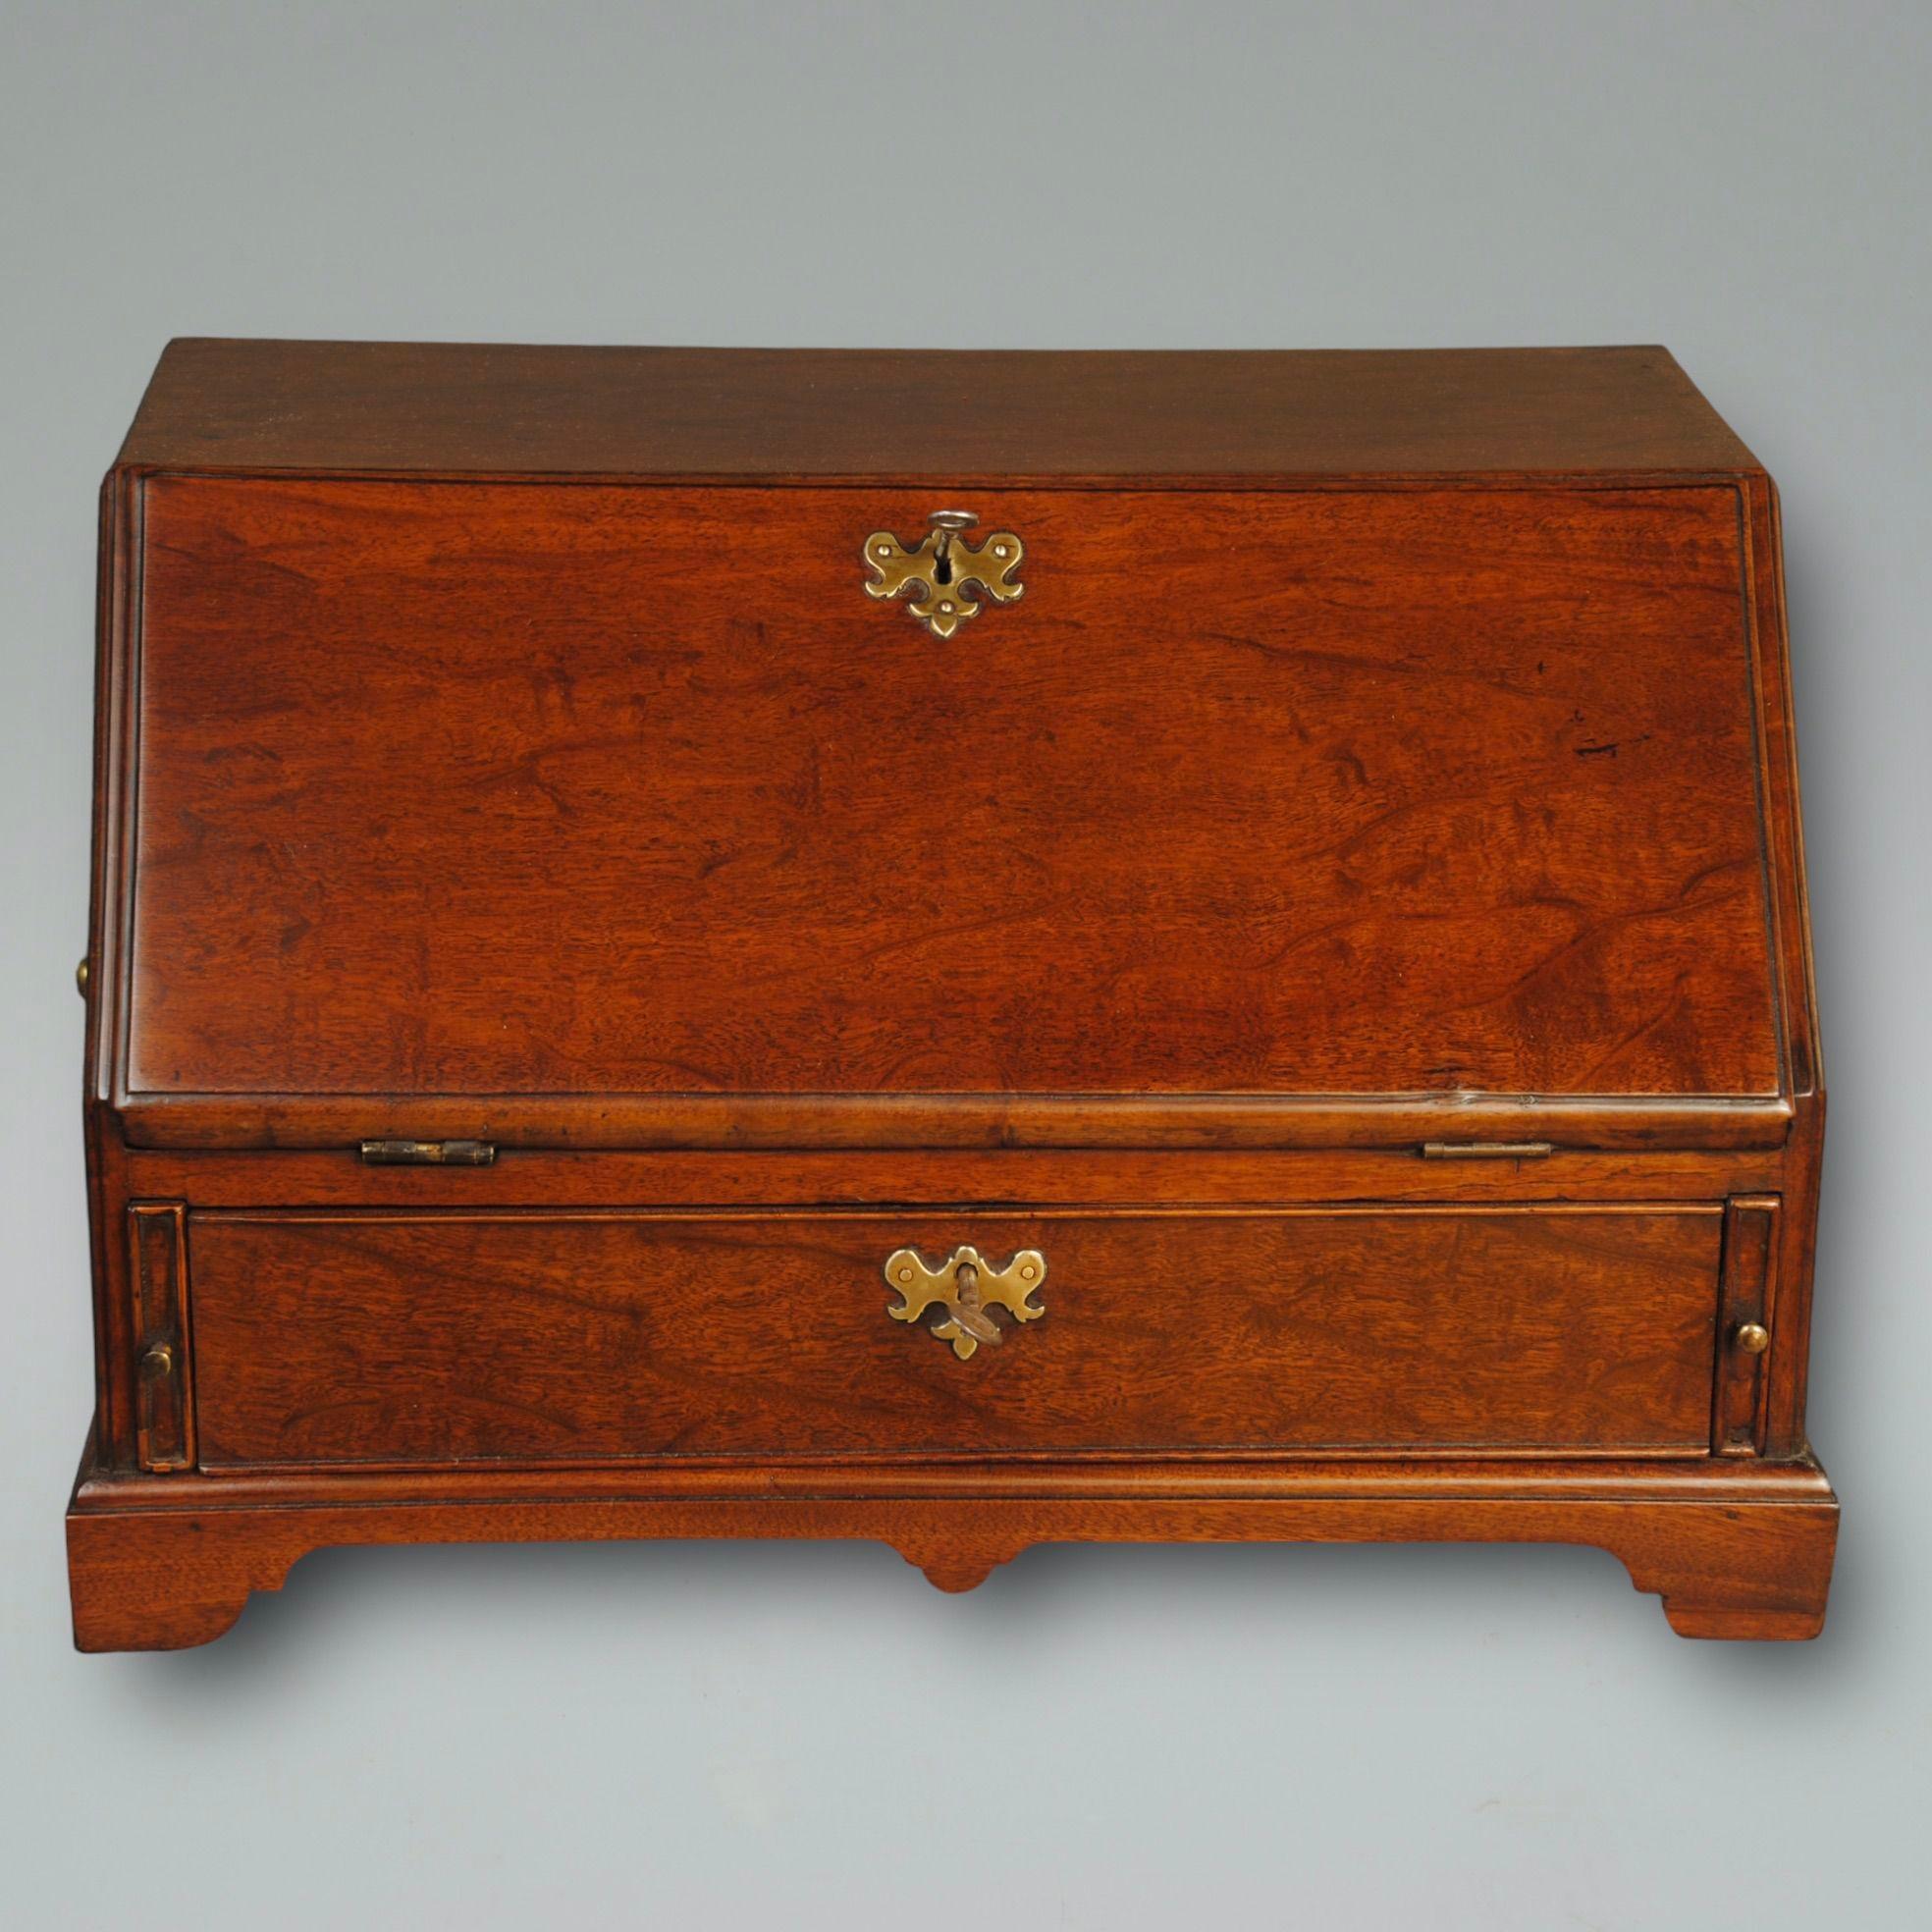 A super plum pudding mahogany miniature table bureau with a beautiful curved fitted interior and original brass carrying handles 
Circa 1740